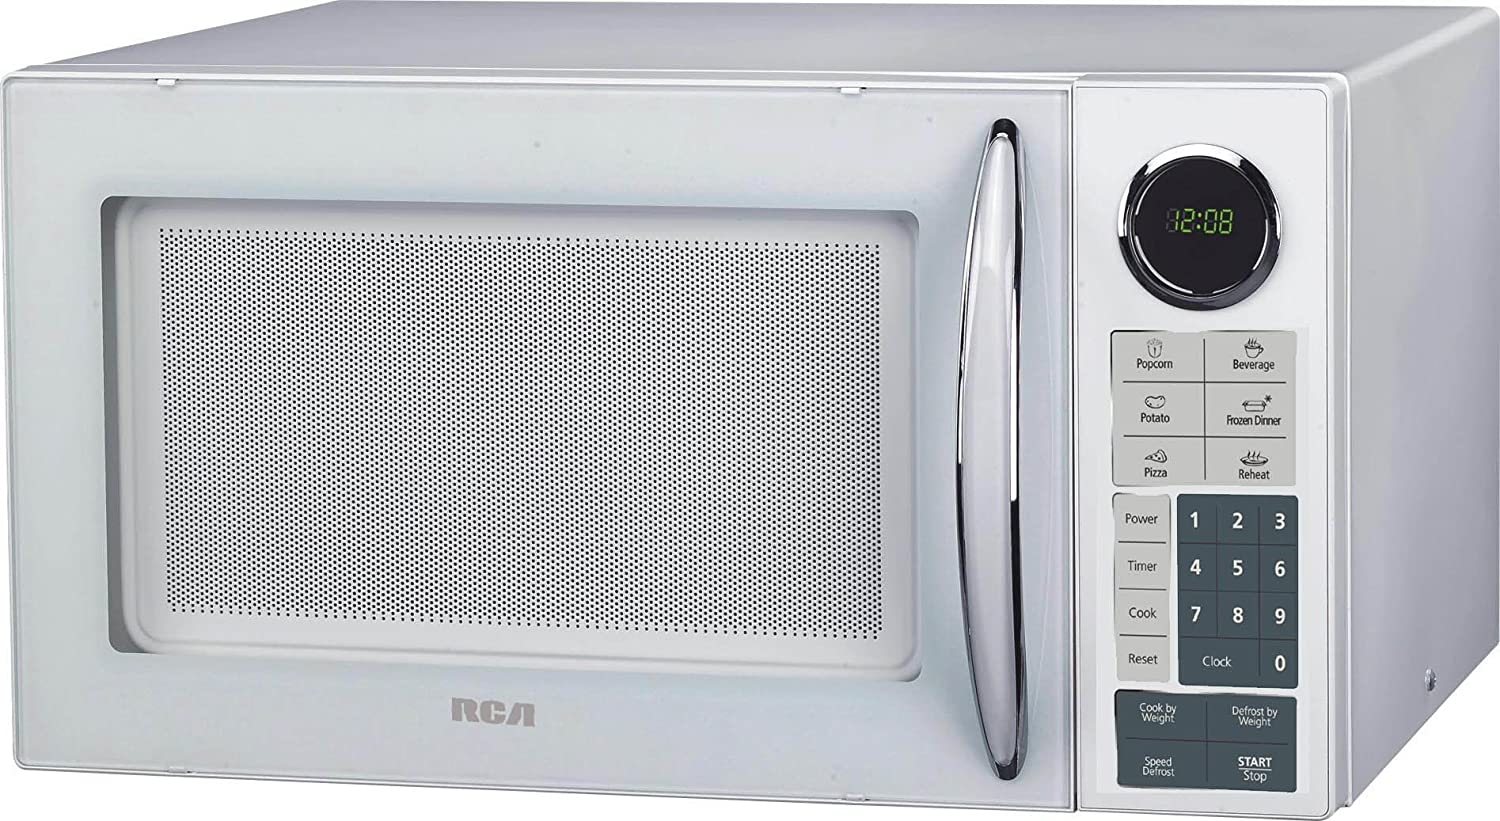 RCA RMW953-BLUE RMW953 0.9-Cubic Feet Microwave Oven with Oversized Display, Blue Import To Shop ×Product customization General